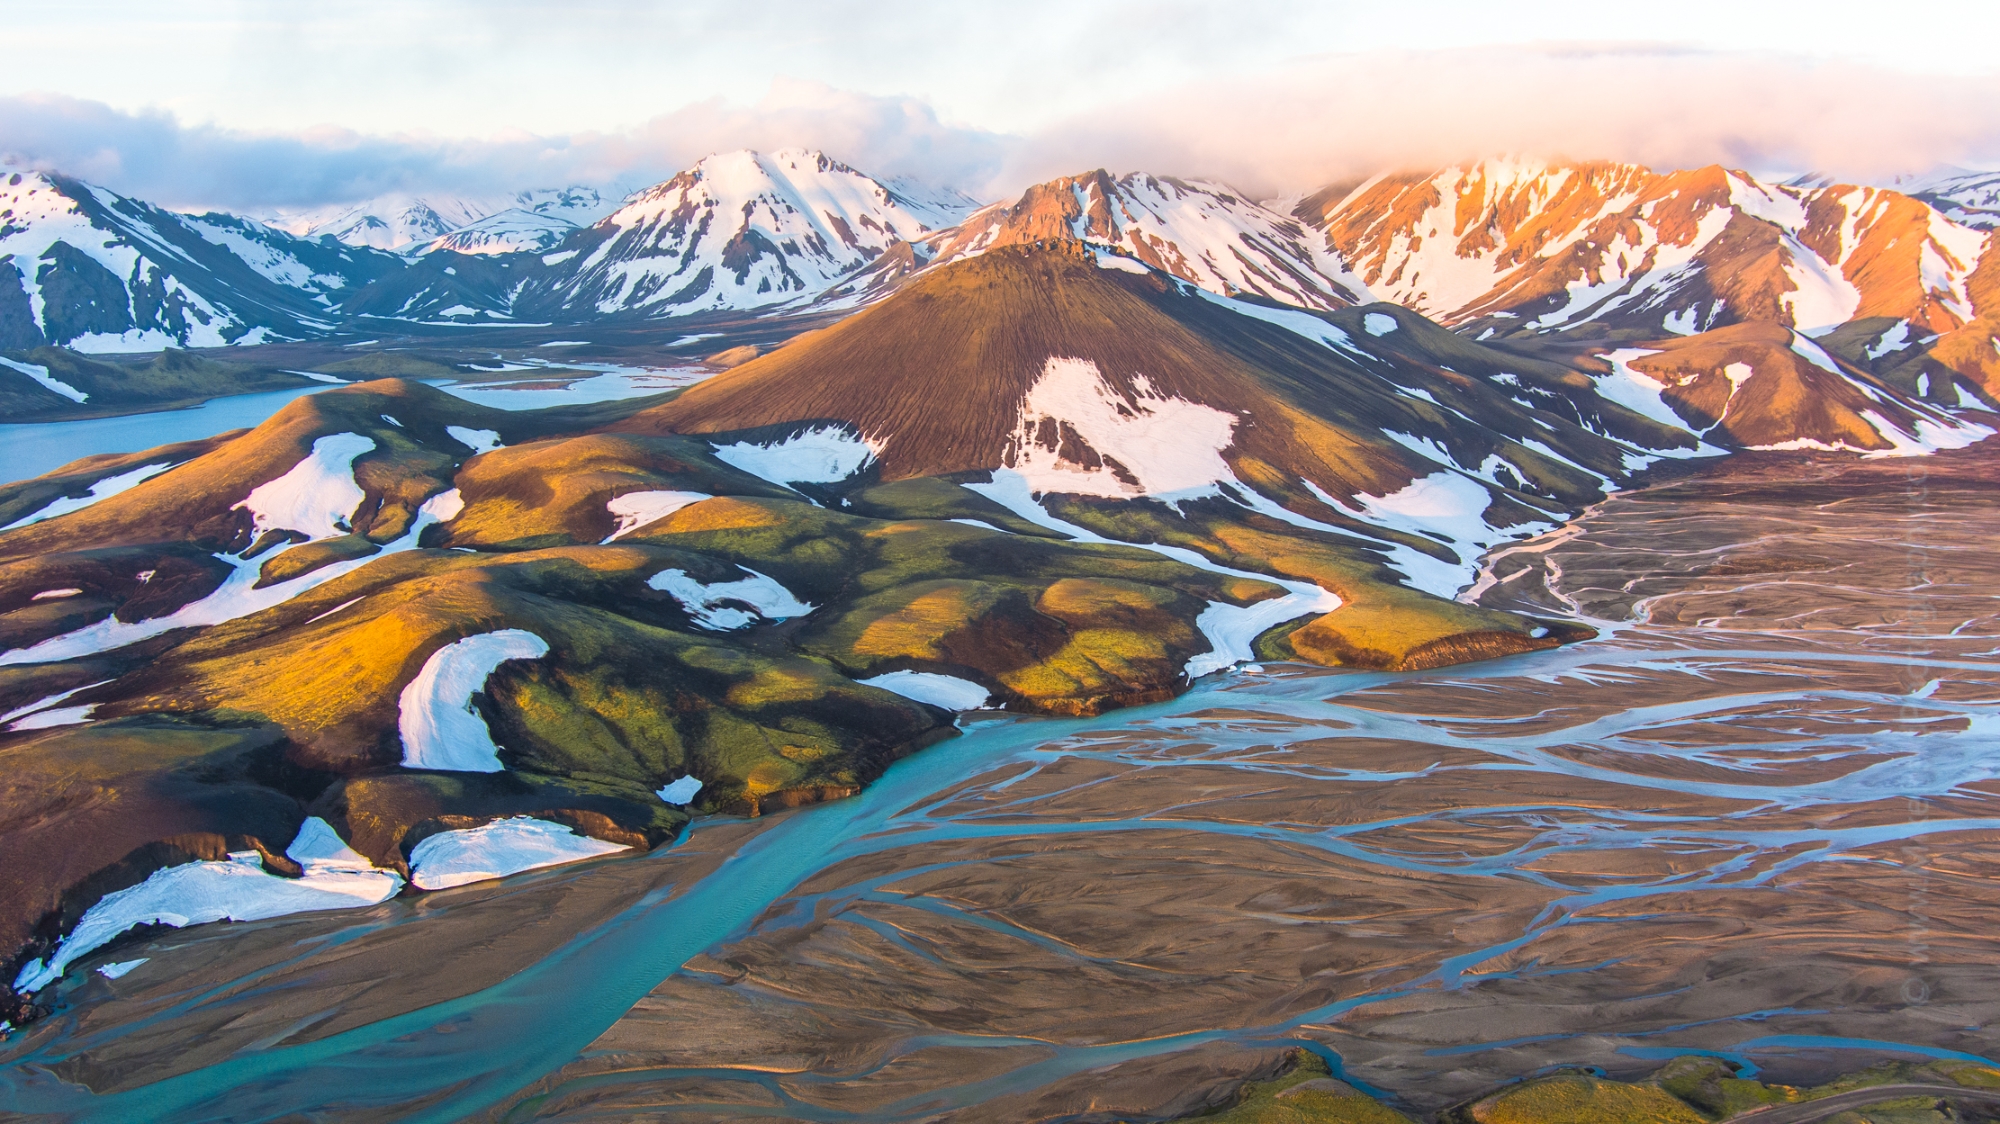 Over Iceland Drone Highlands Winding Rivers.jpg 